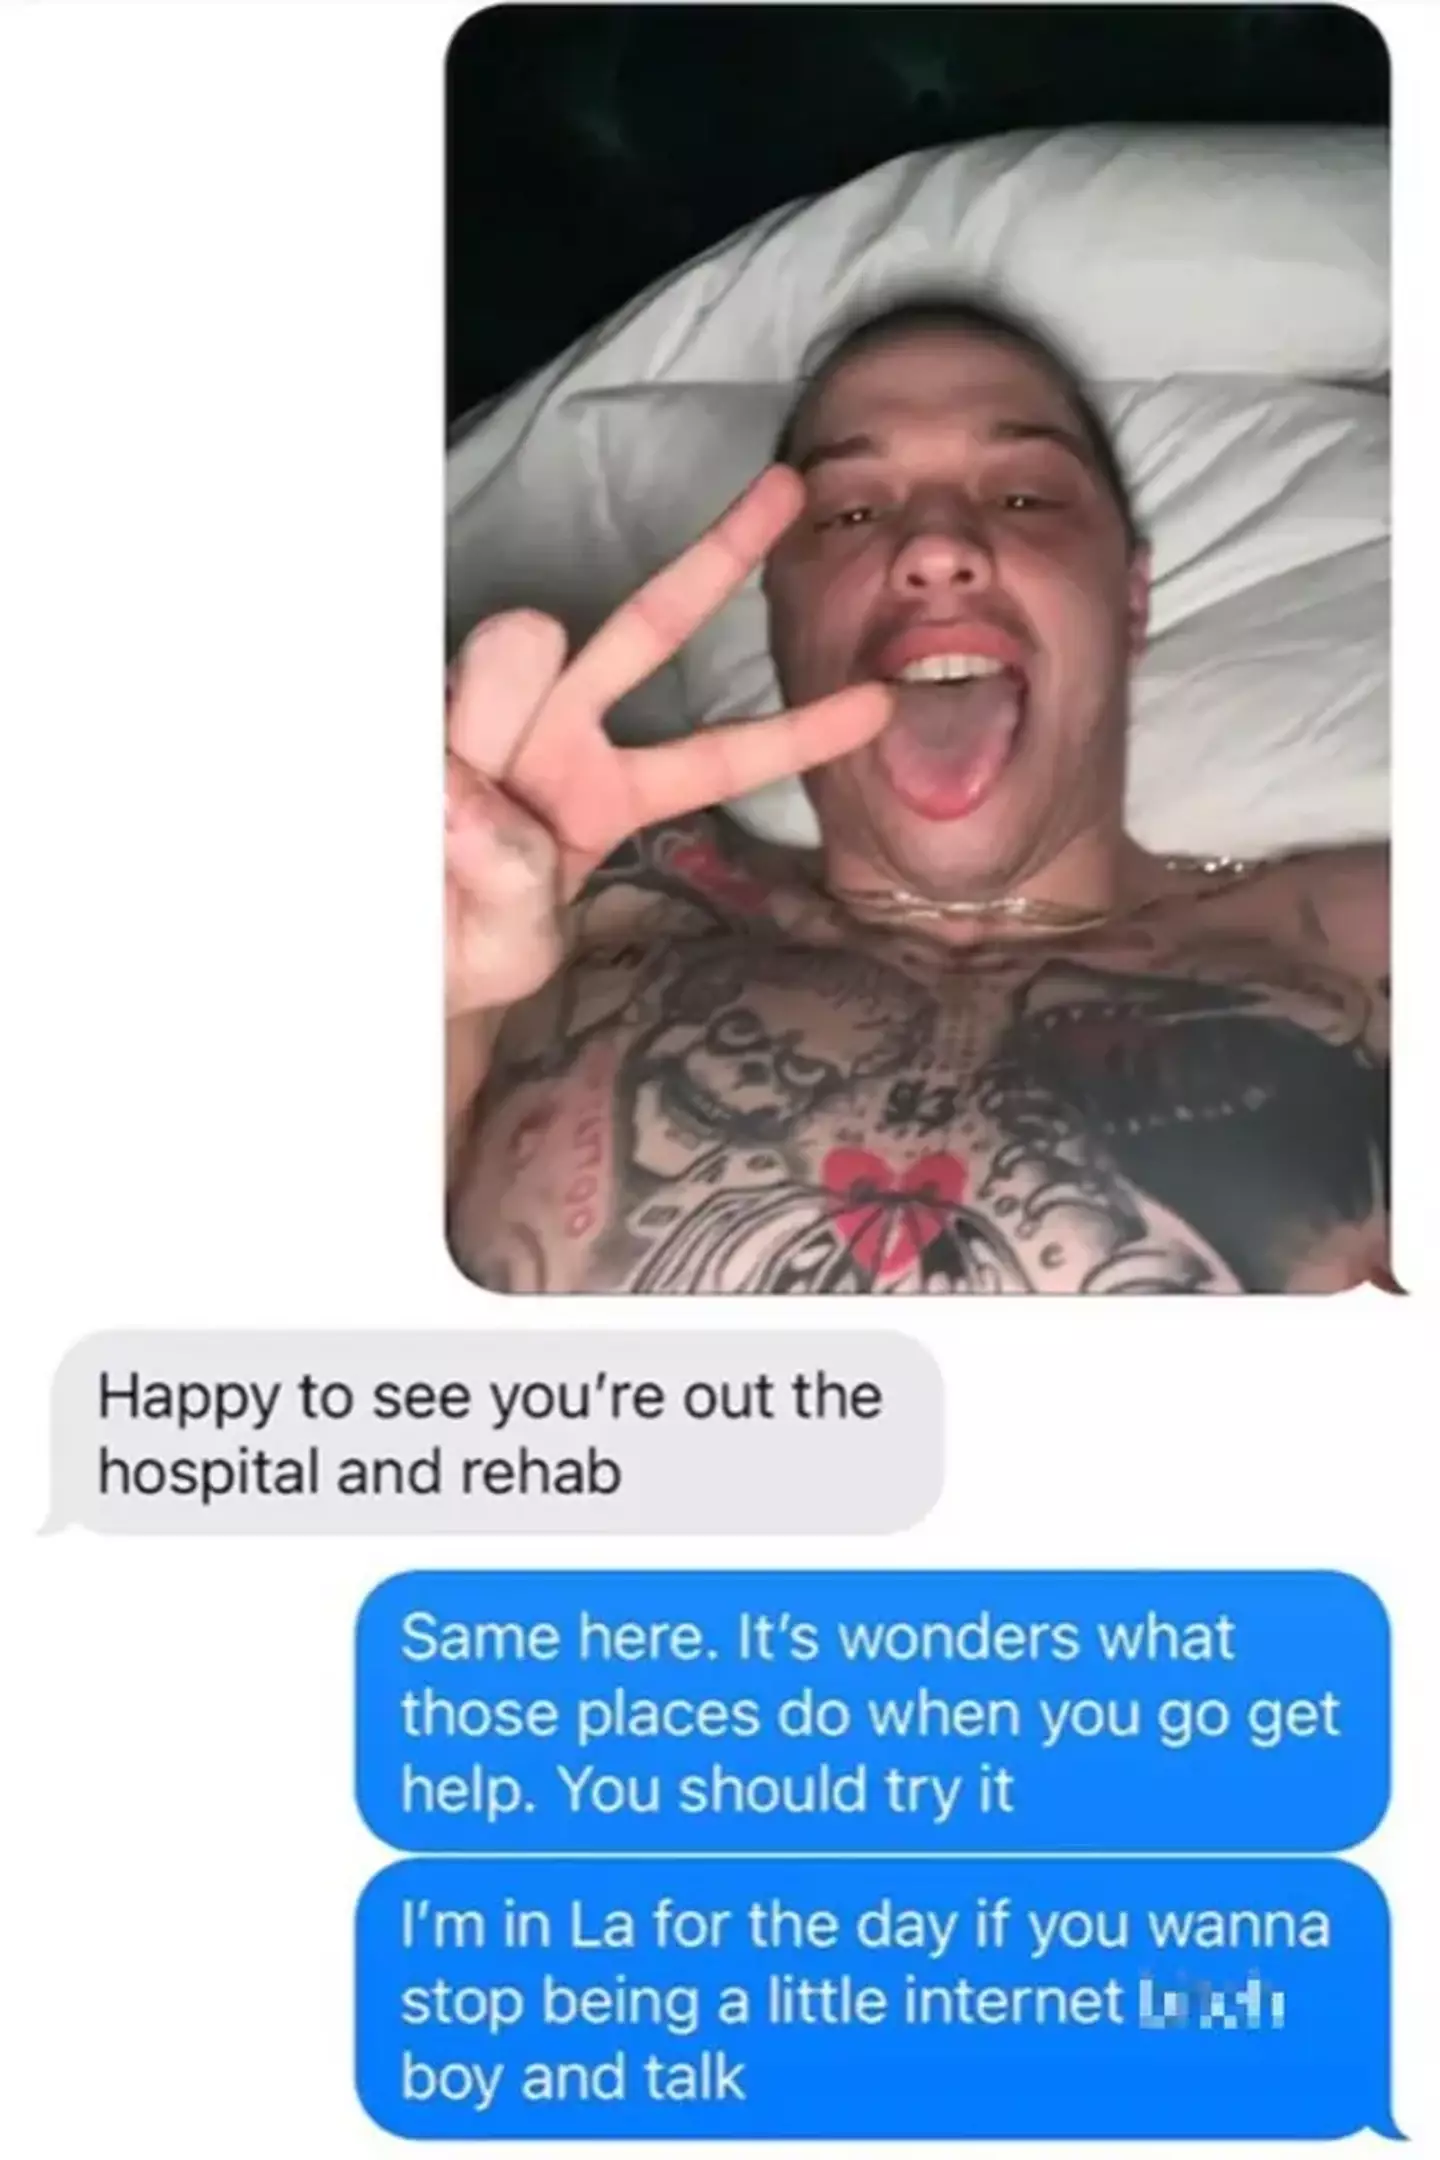 Pete Davidson's alleged text messages to Ye.